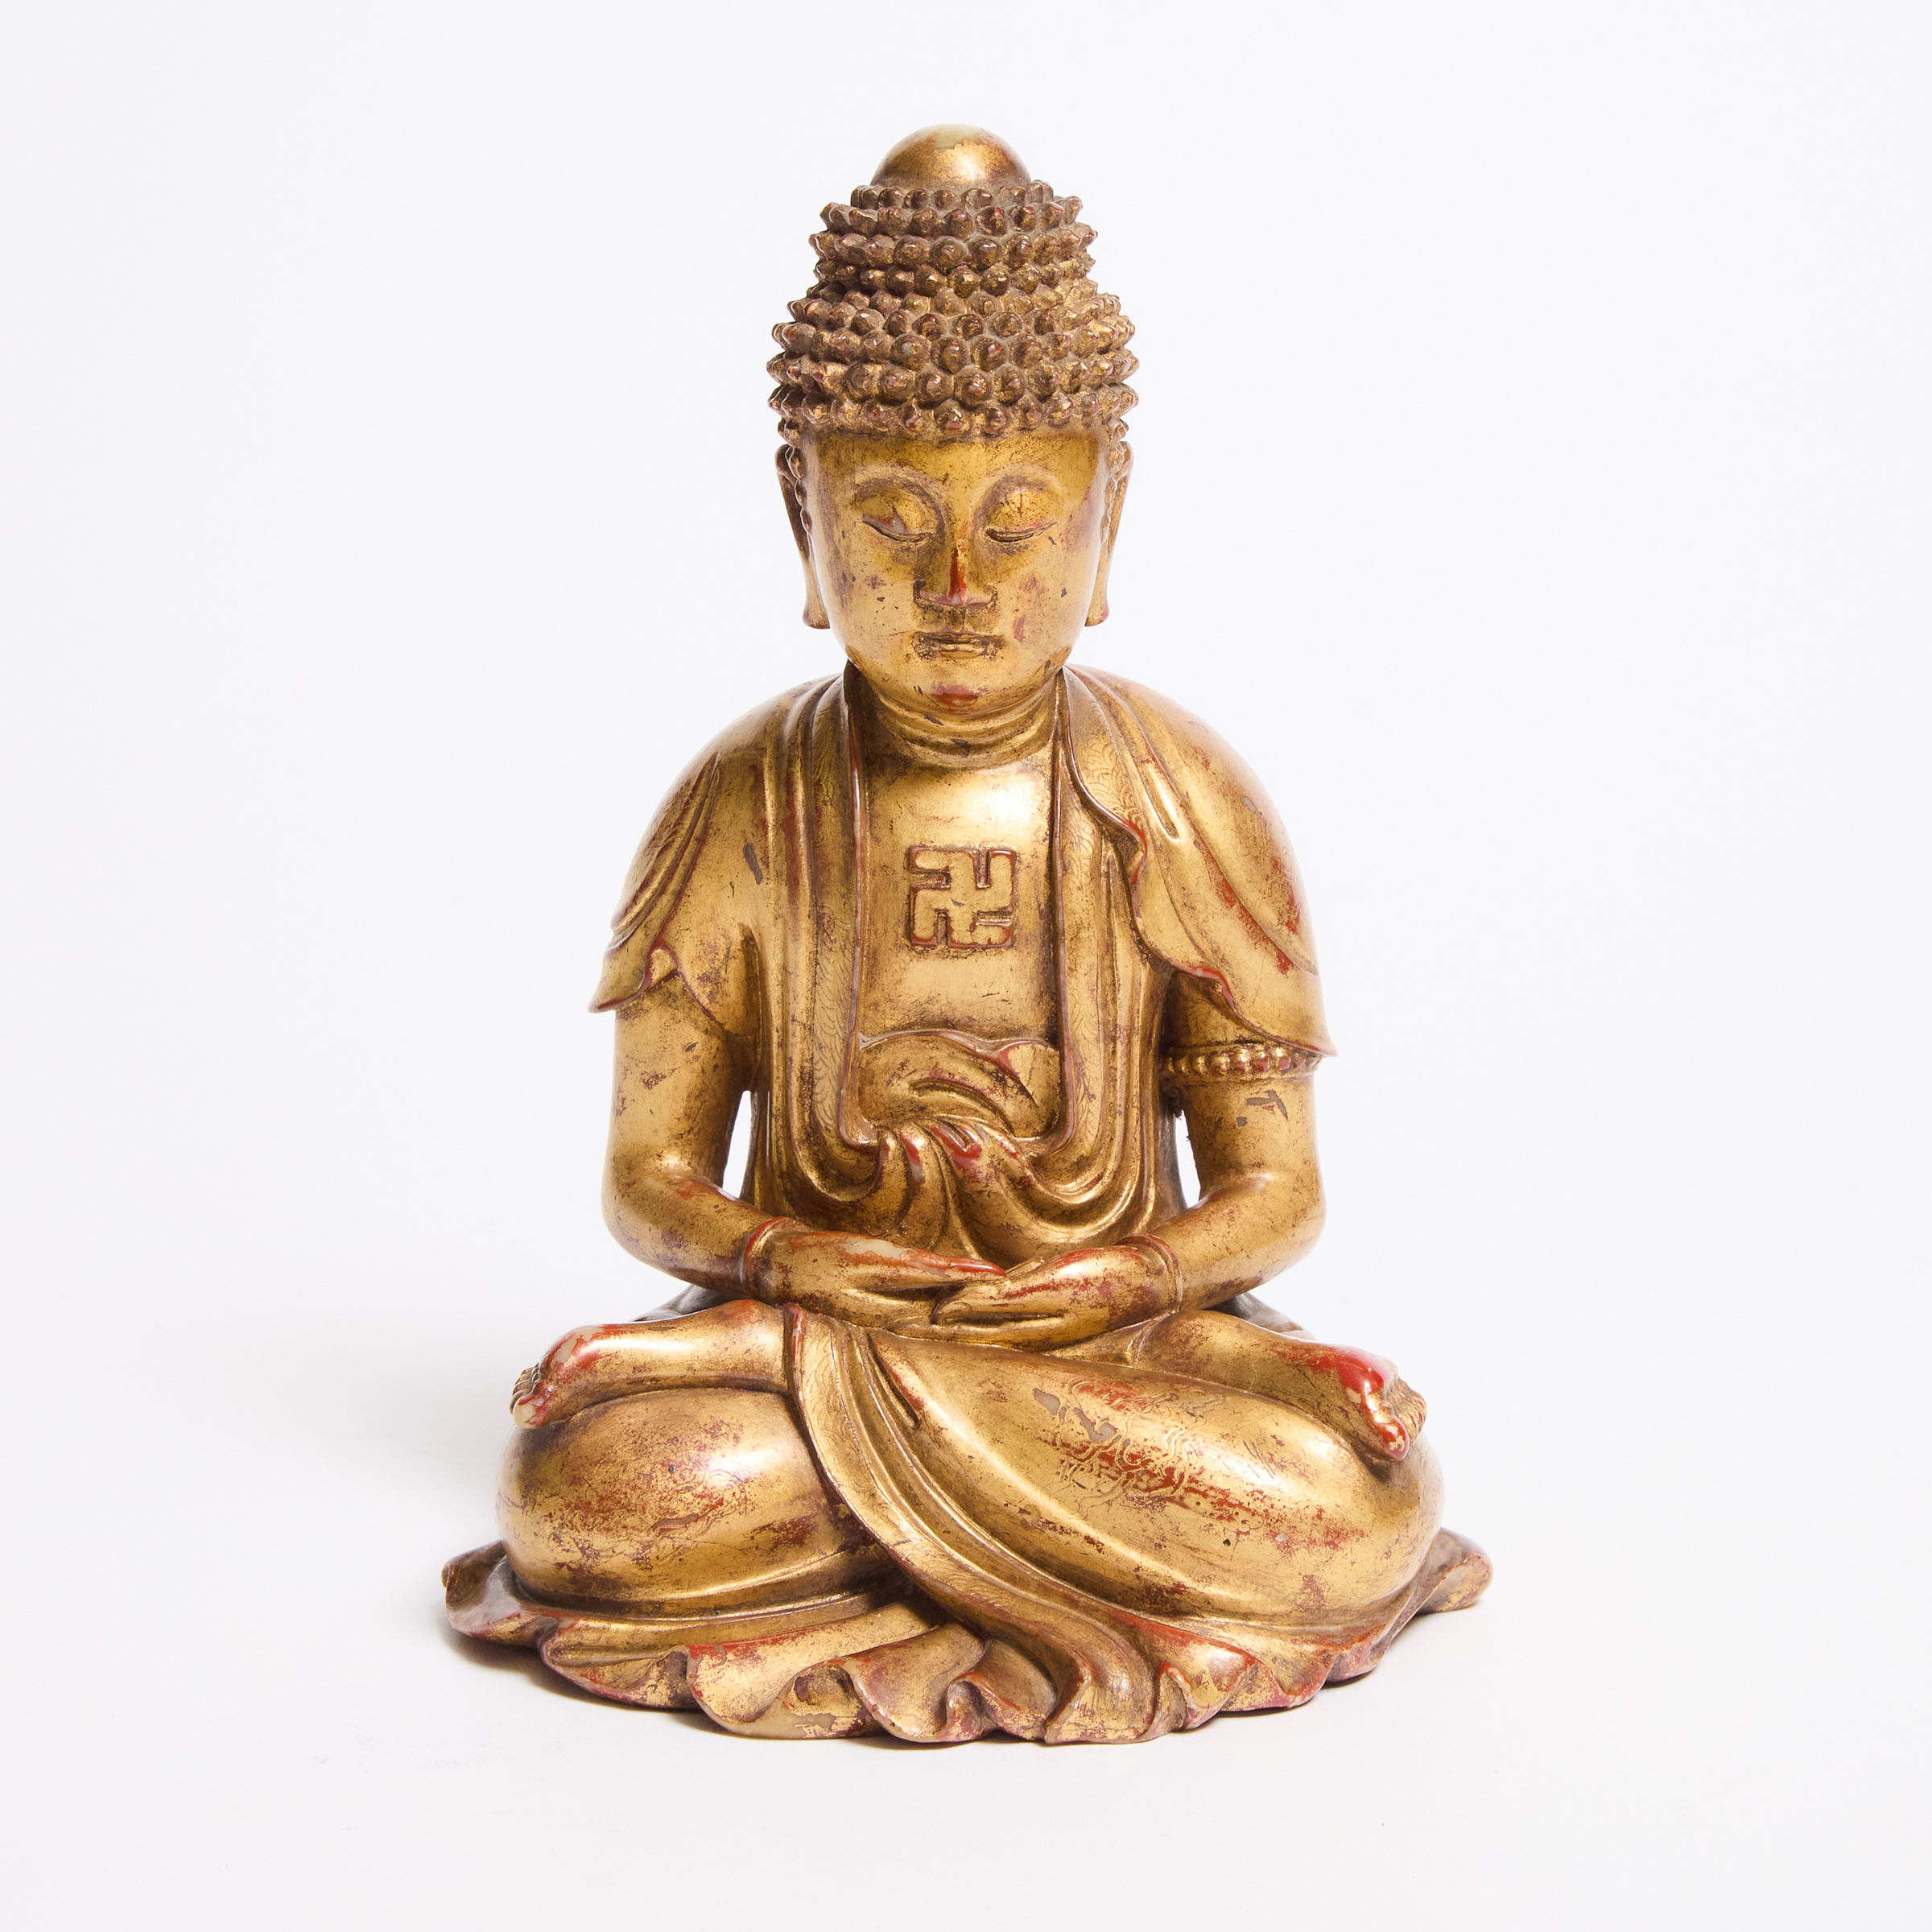 A Rare Gilt-Lacquered Soapstone Figure of Buddha, Ming Dynasty (1368-1644)